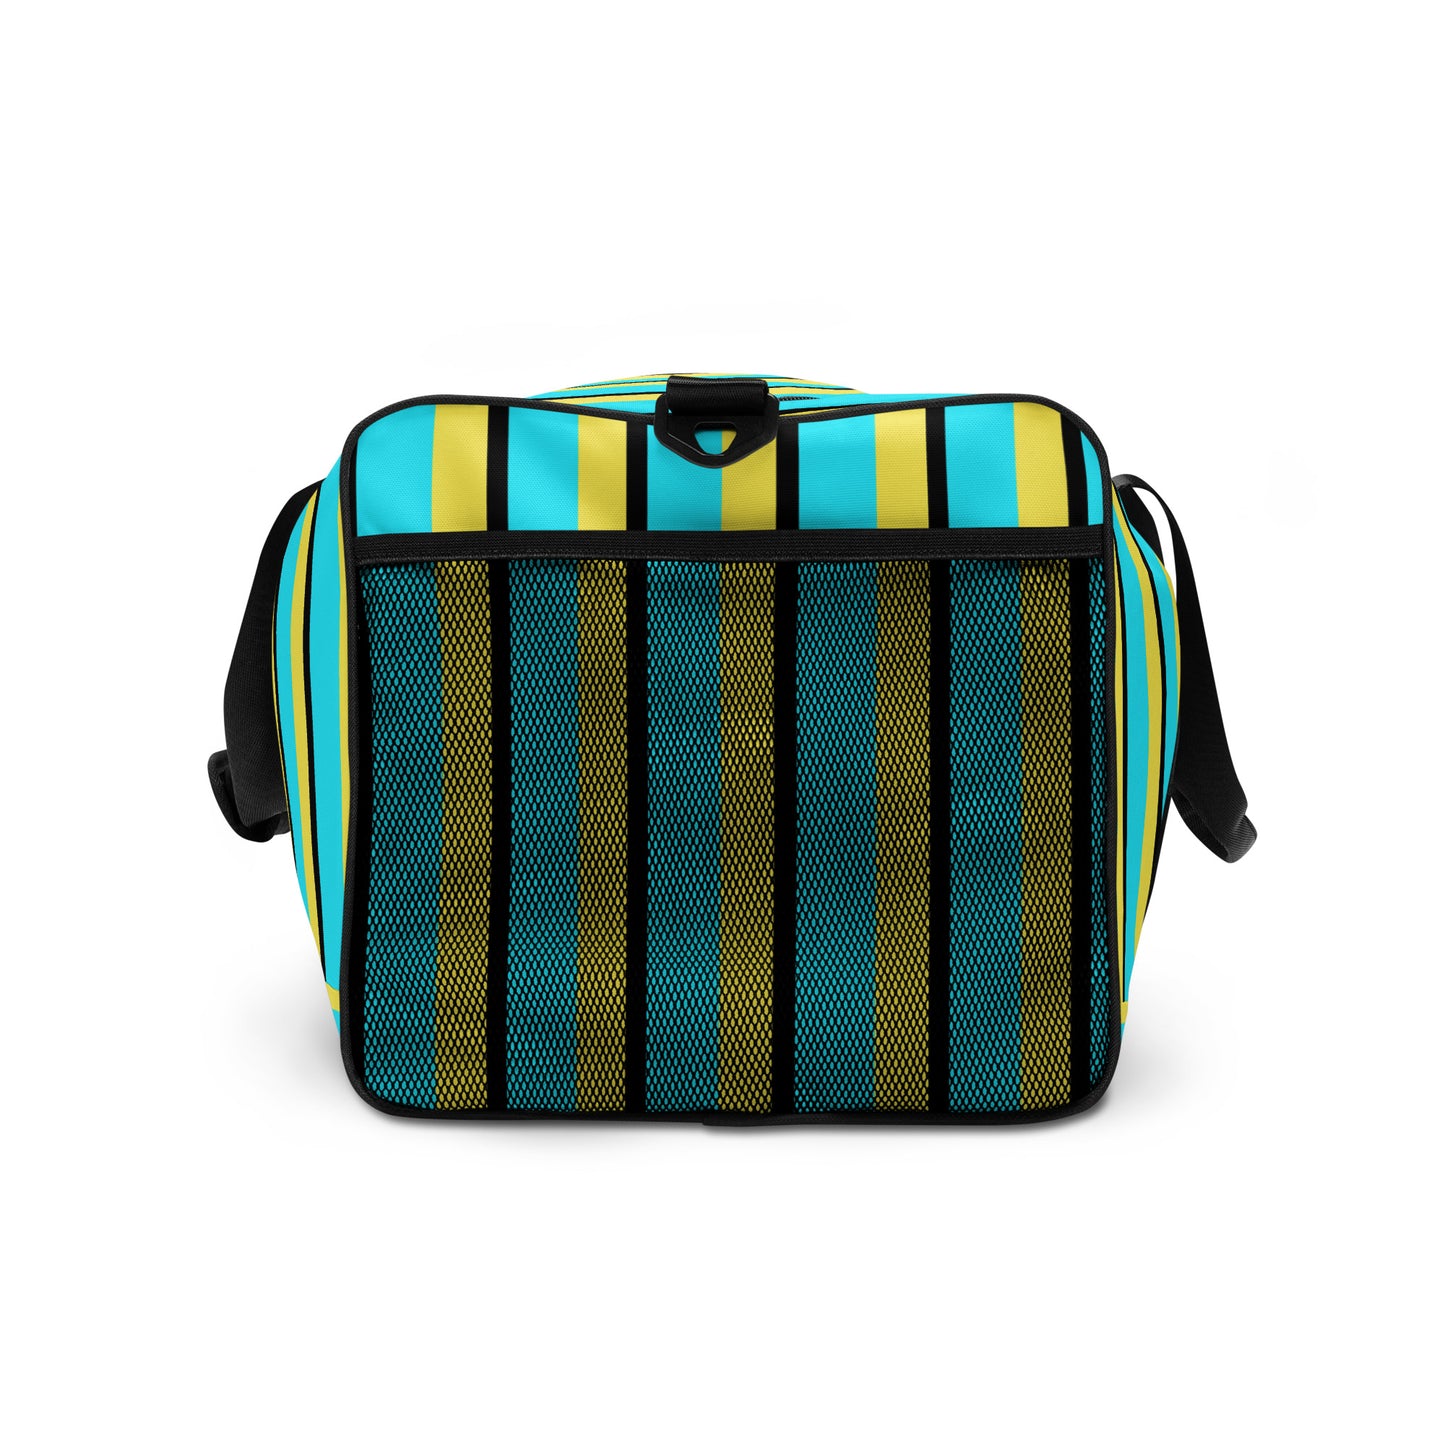 Vintage Stripes - Inspired By Harry Styles - Sustainably Made  Duffle bag